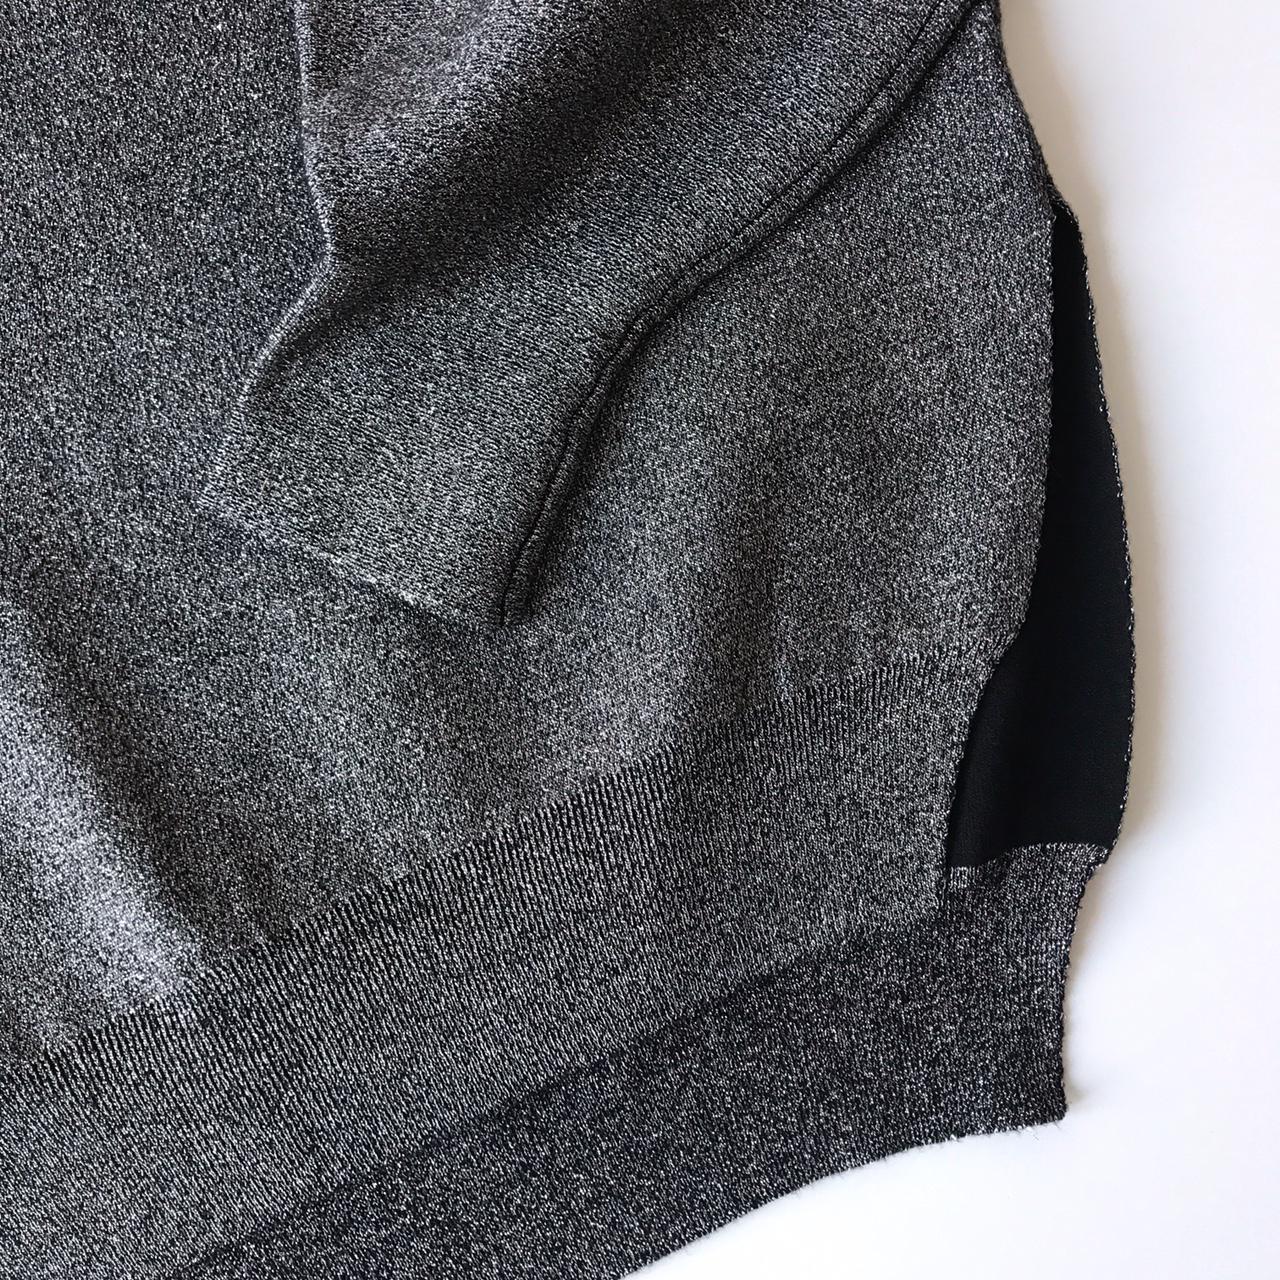 H&M oversize knitted sweater with a silvery... - Depop